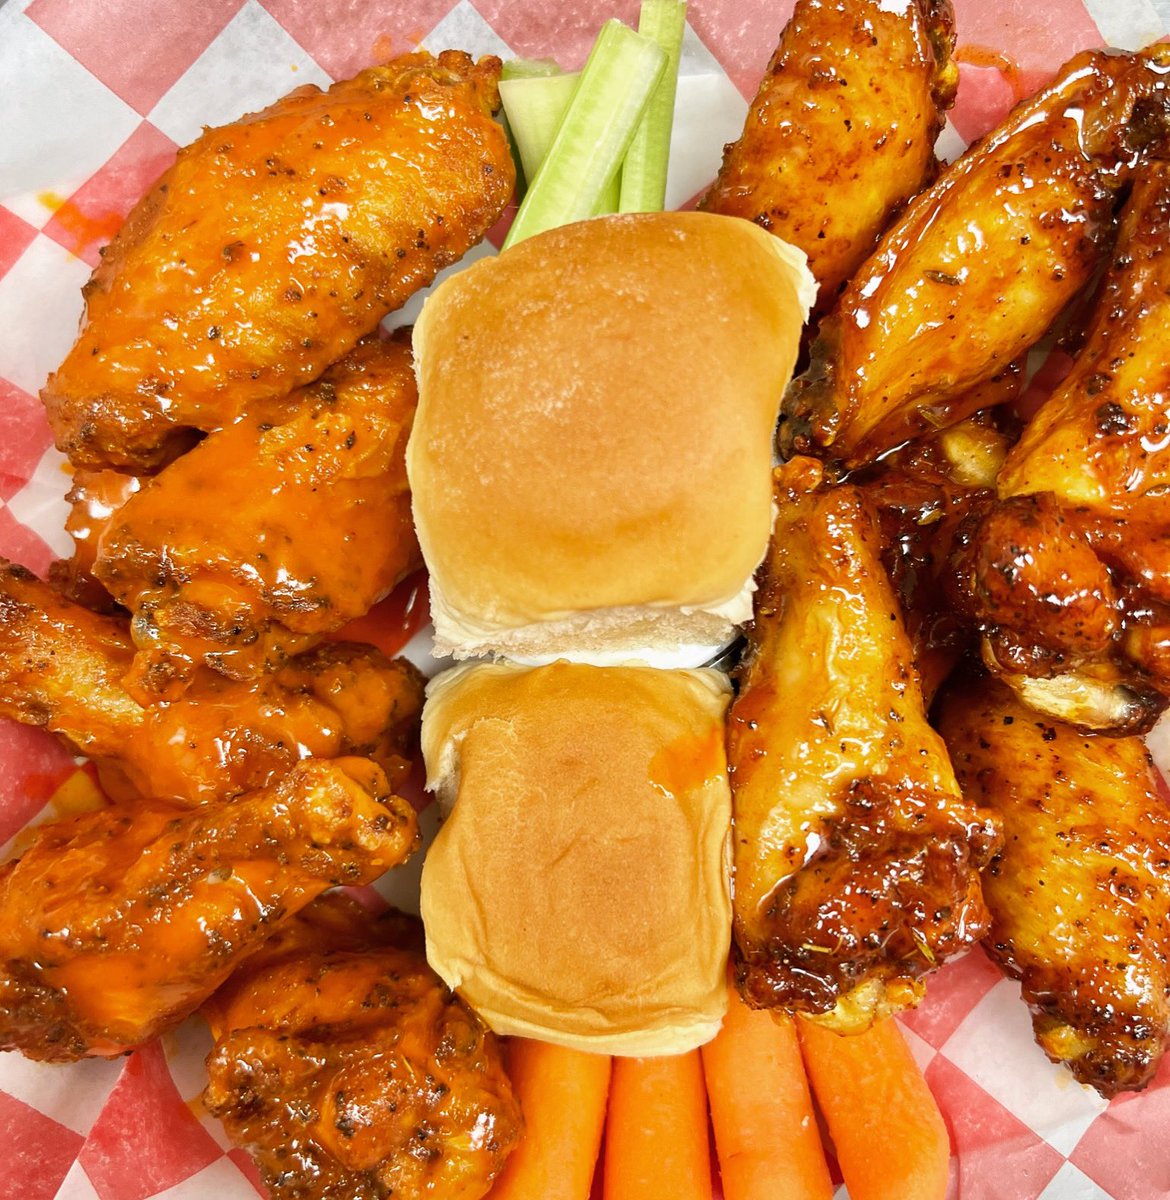 Happy Wing Wednesday! We’ll be serving lunch at @CampbellClinic (1400 S Germantown Rd, Germantown, TN 38138) 11:00-1:00 today. #WingWednesday #Choose901 #901Eats #Wings #HotWings #ChickenWings #Tacos #Nachos #EatLocal #Catering